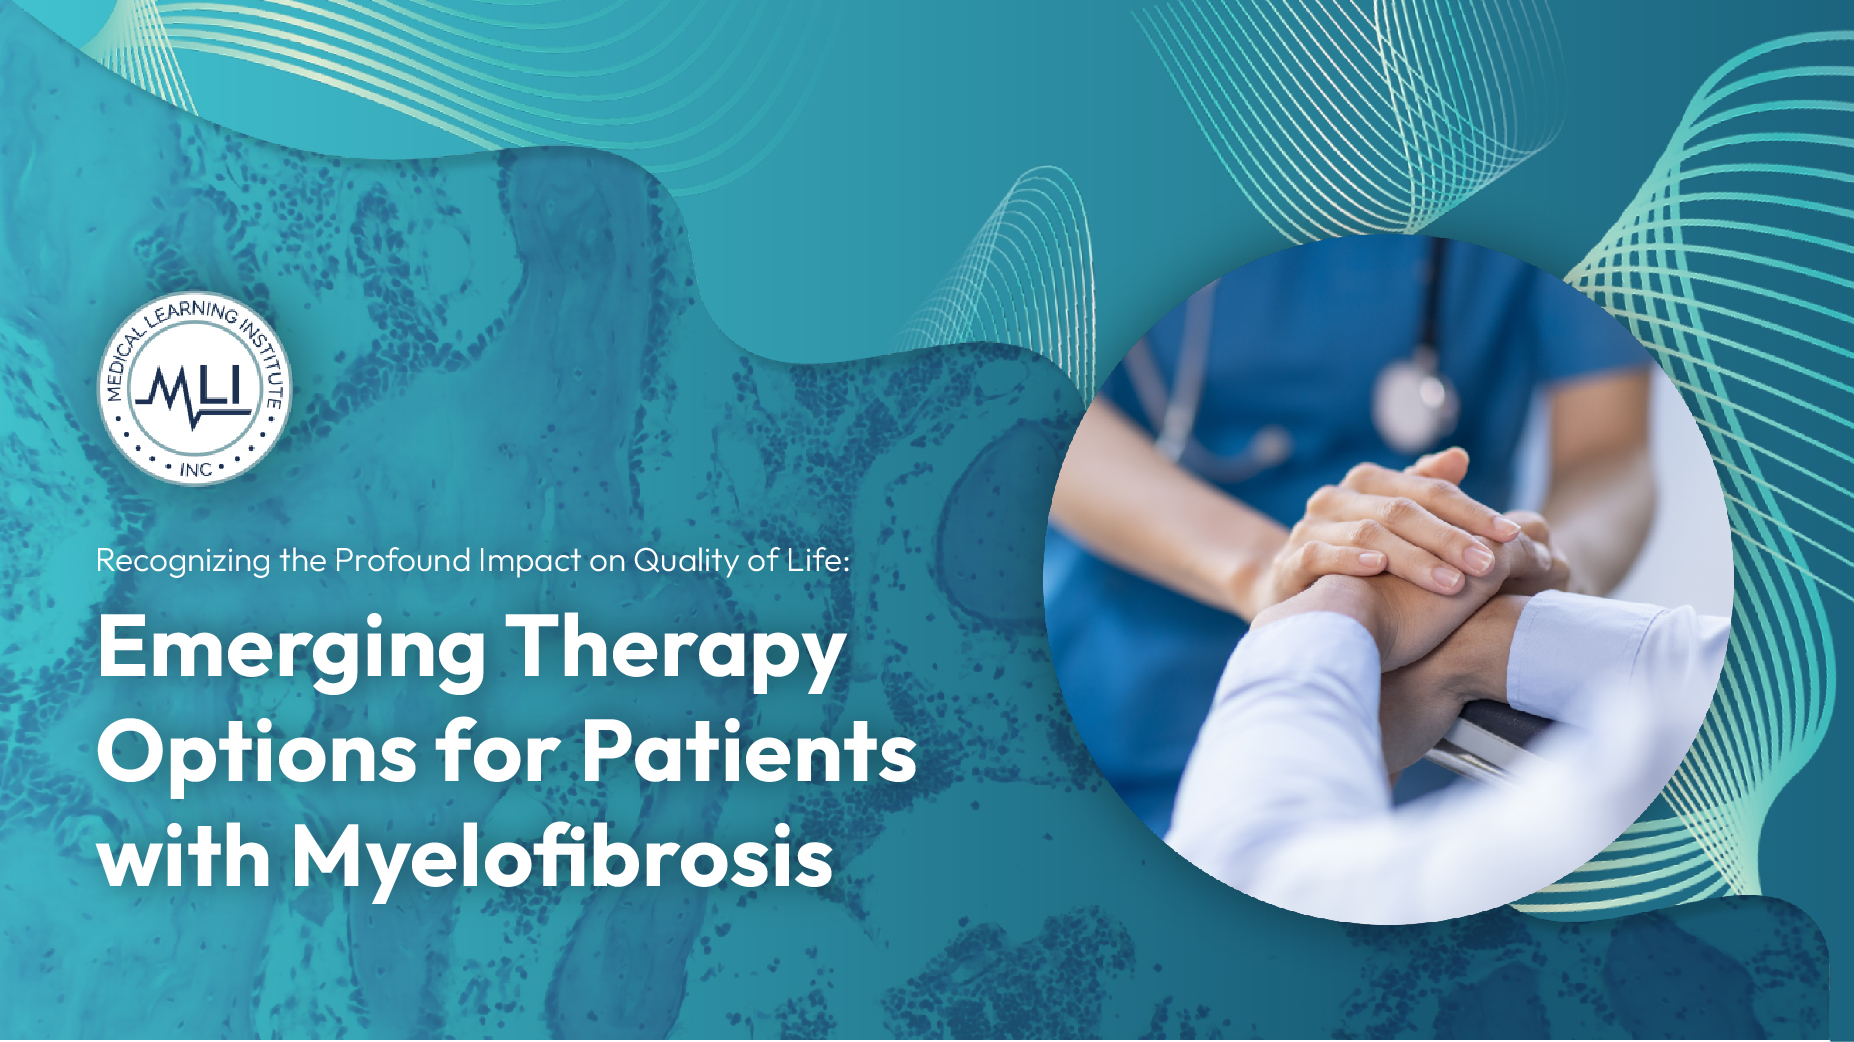 Recognizing the Profound Impact on Quality of Life: Emerging Therapy Options for Patients with Myelofibrosis